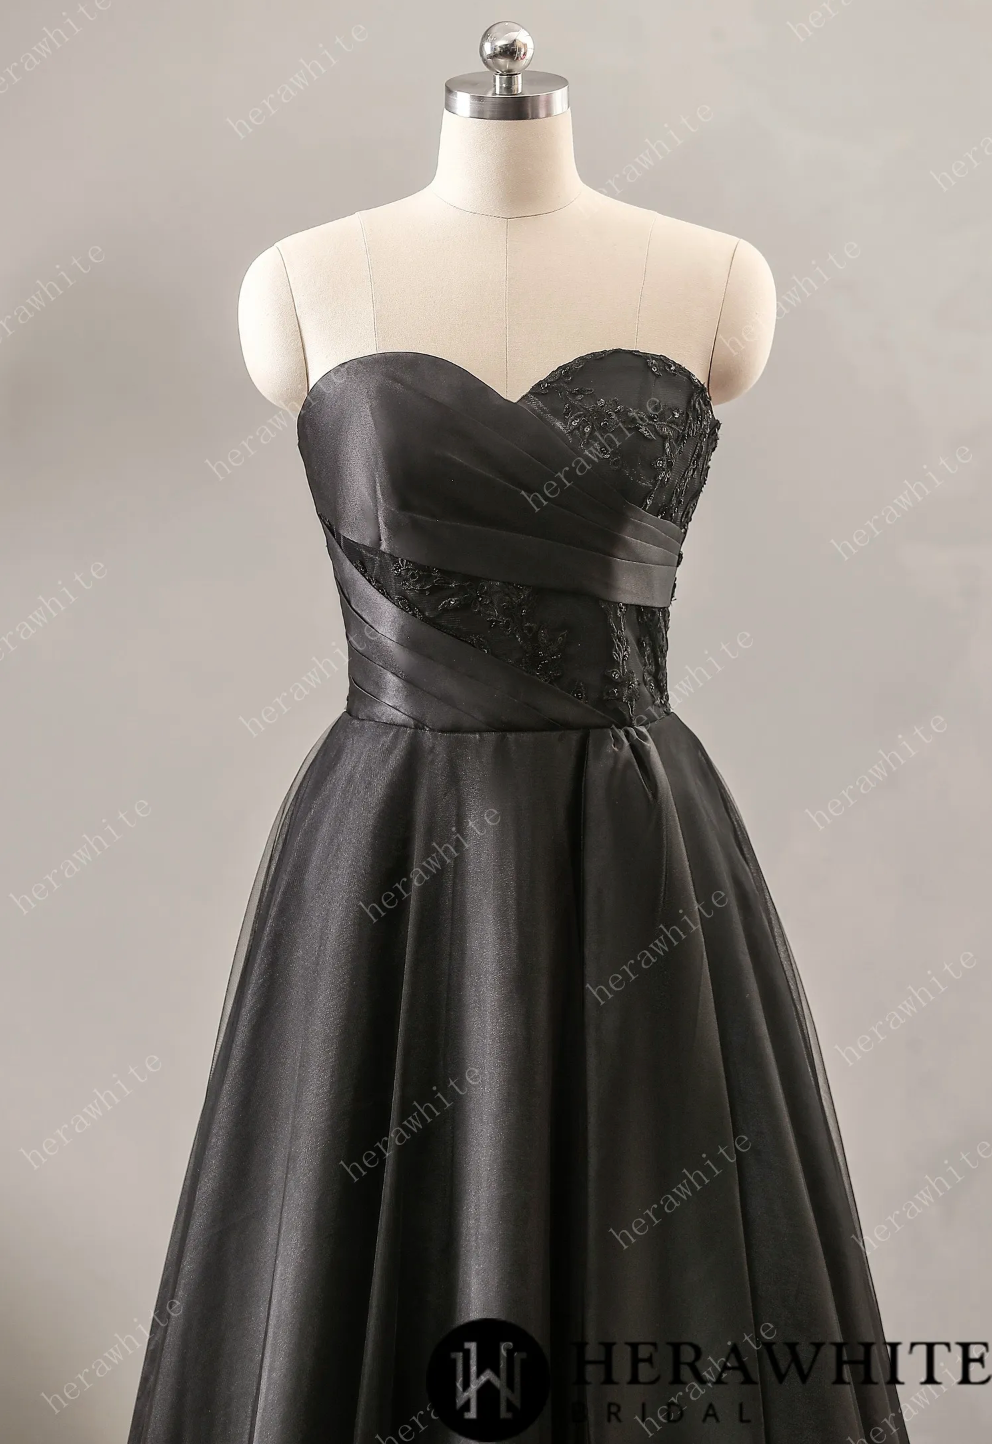 Load image into Gallery viewer, Black Strapless Wedding Dress with Sweetheart Neckline
